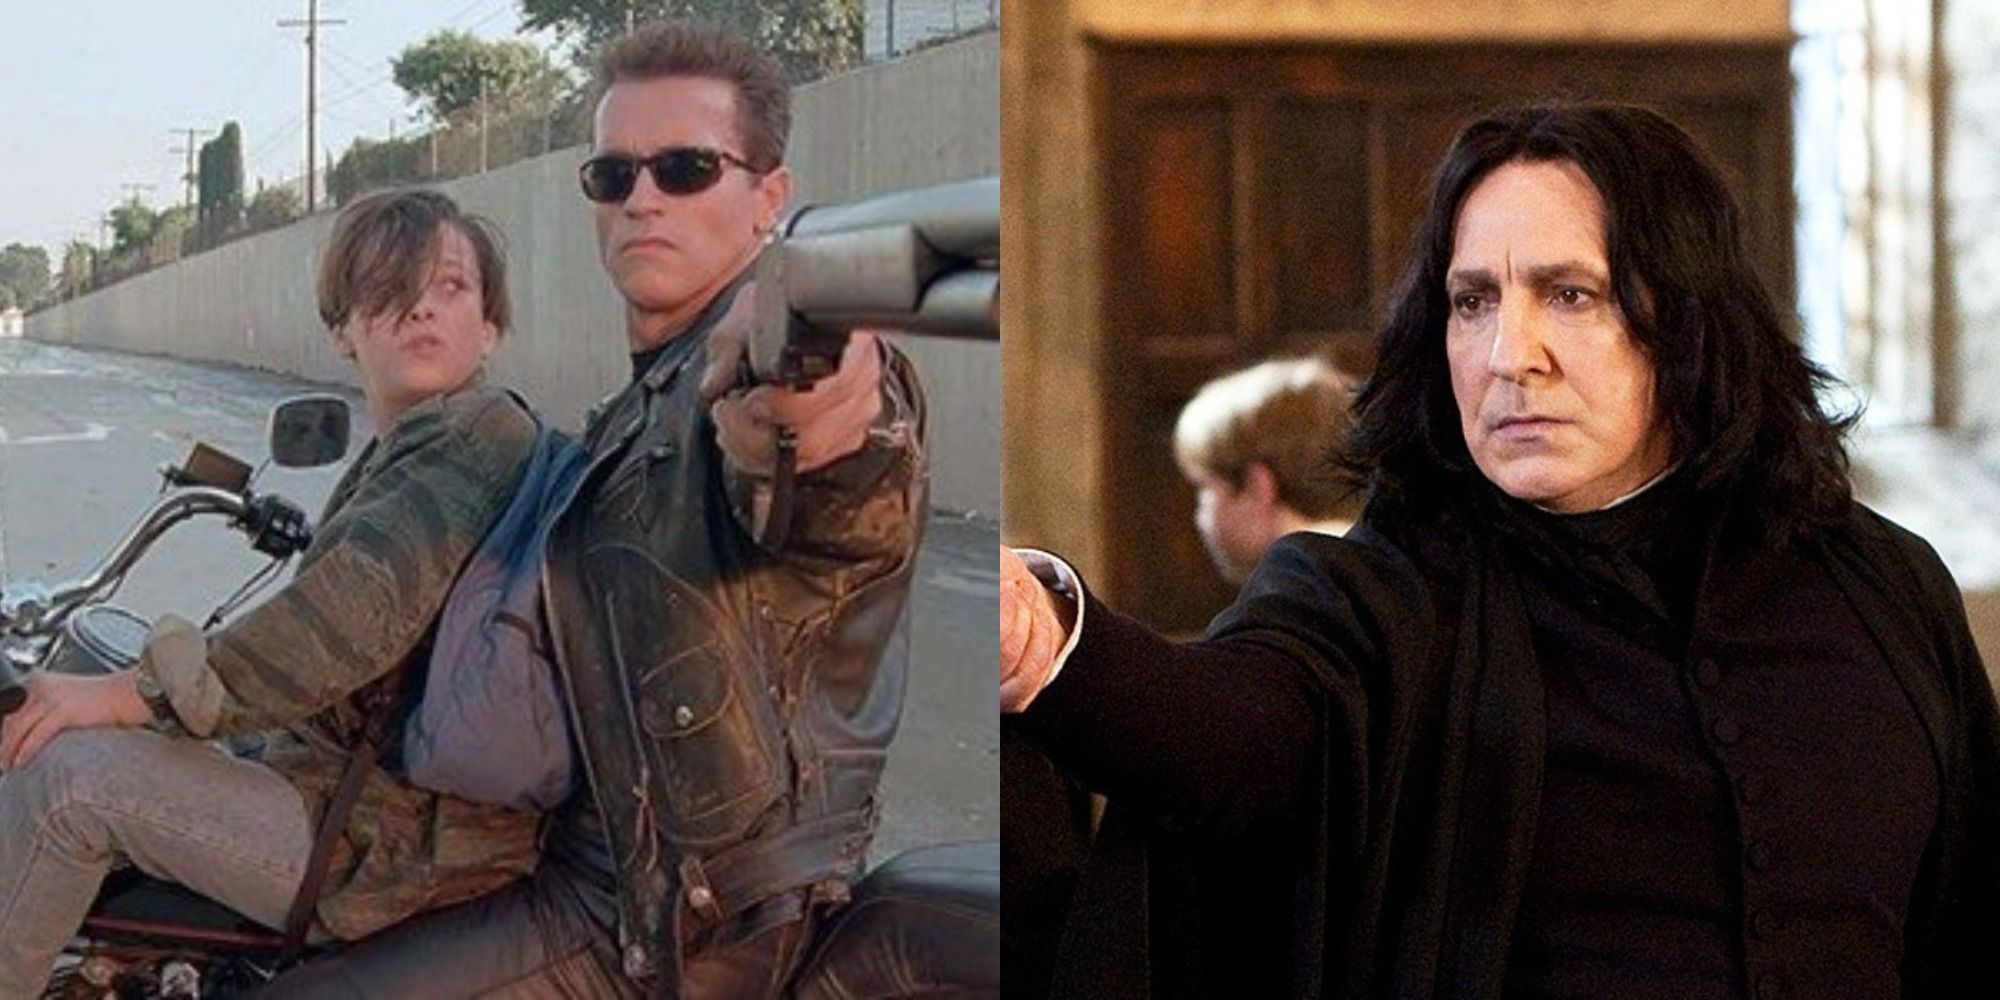 A split image of the T-800 and John Connor in Terminator and Snape in Harry Potter